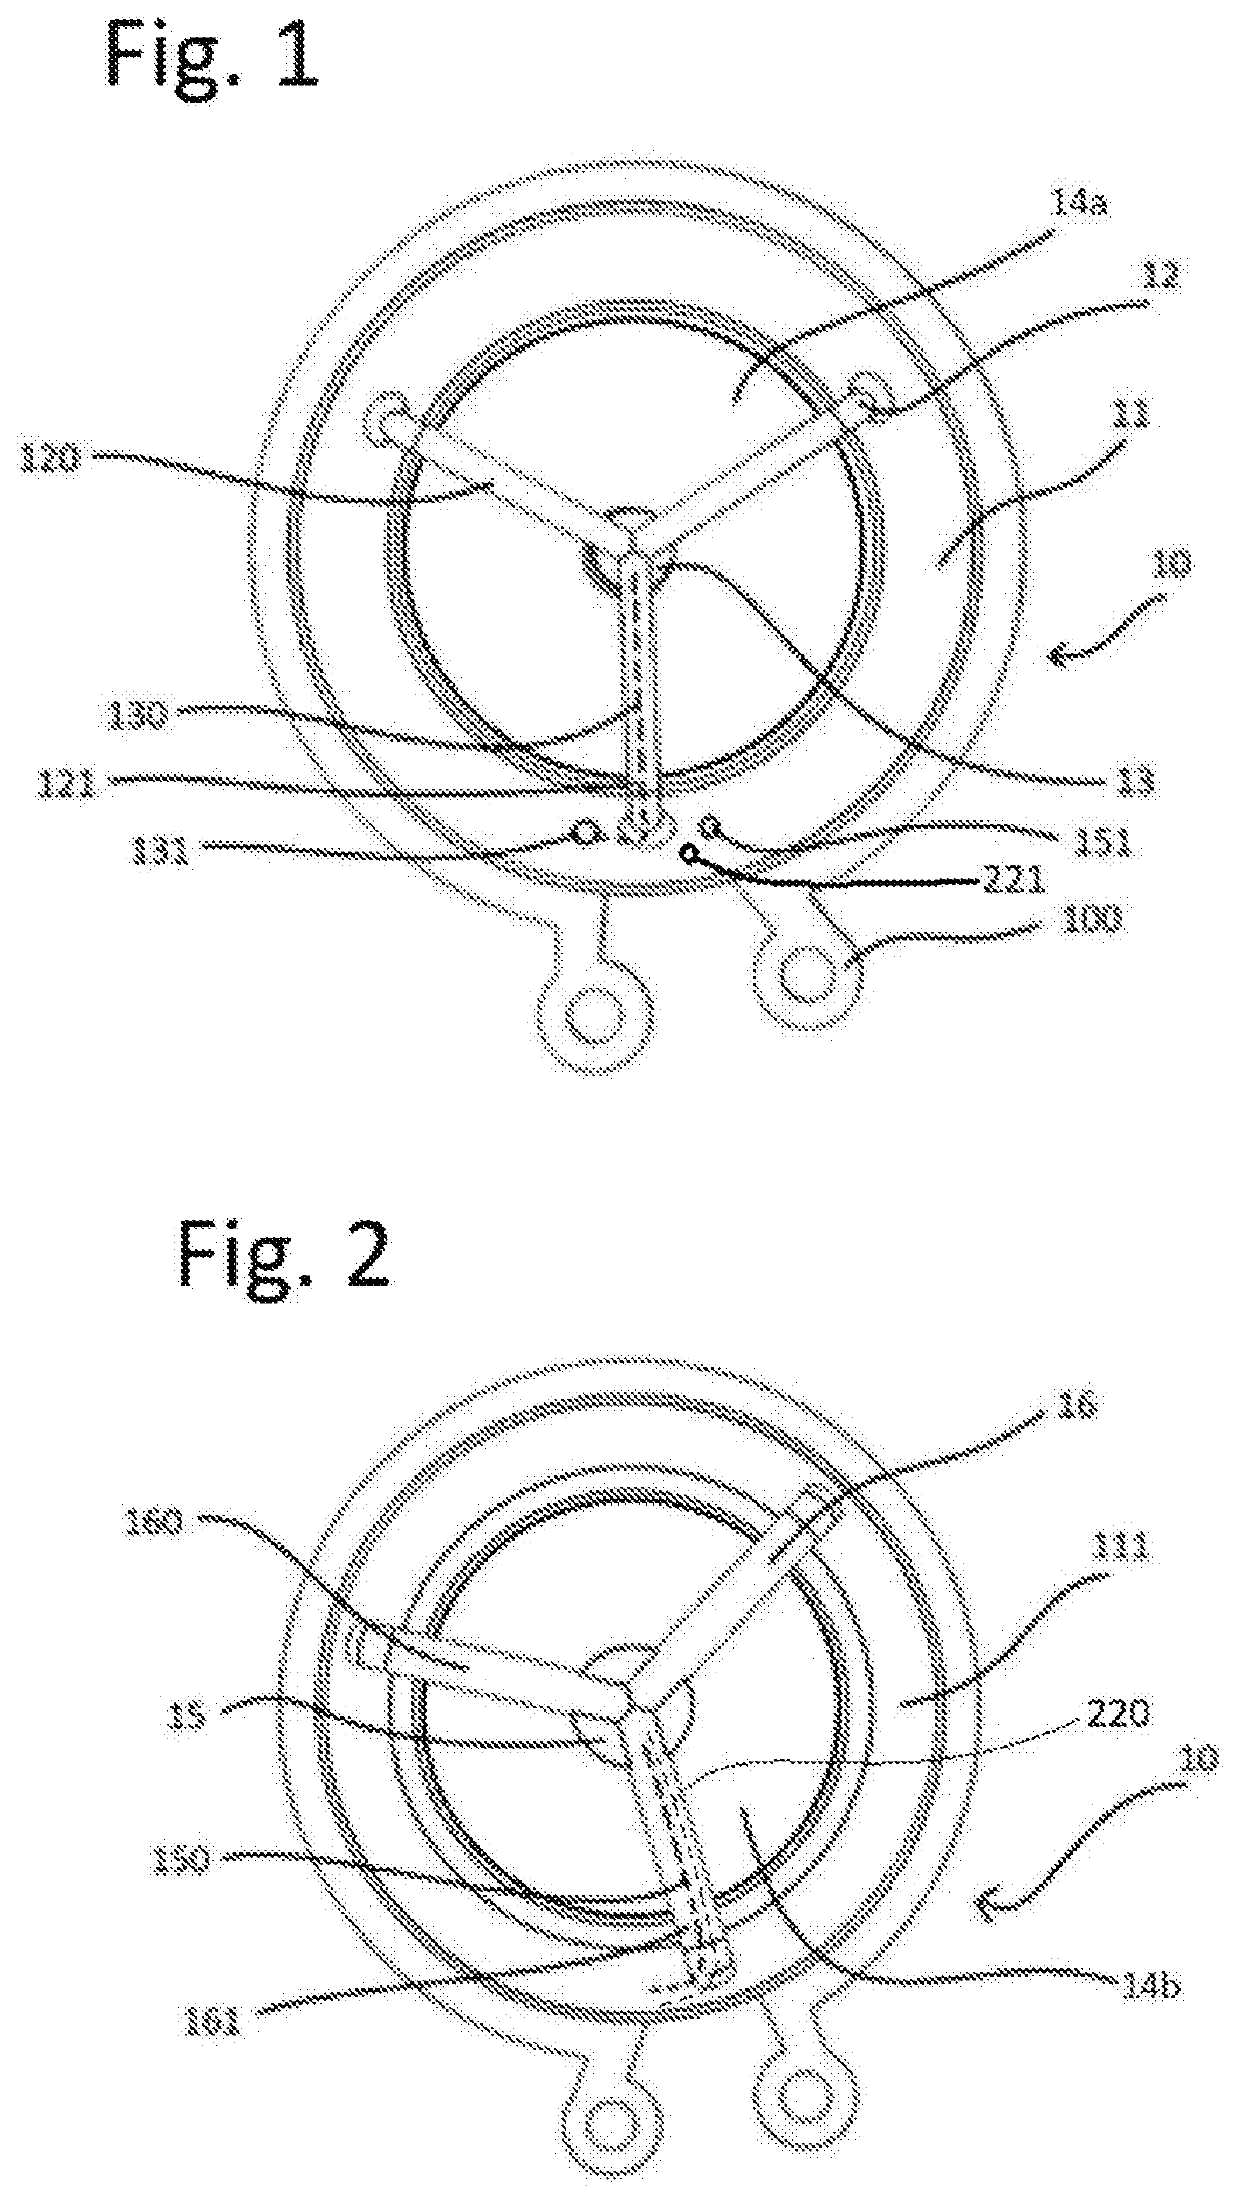 Single circular convex magnet leaflet disc with an opposing upper and lower magnetic field and electronic semiconductor sensor prosthetic heart valve that can communicate from the heart to the brain